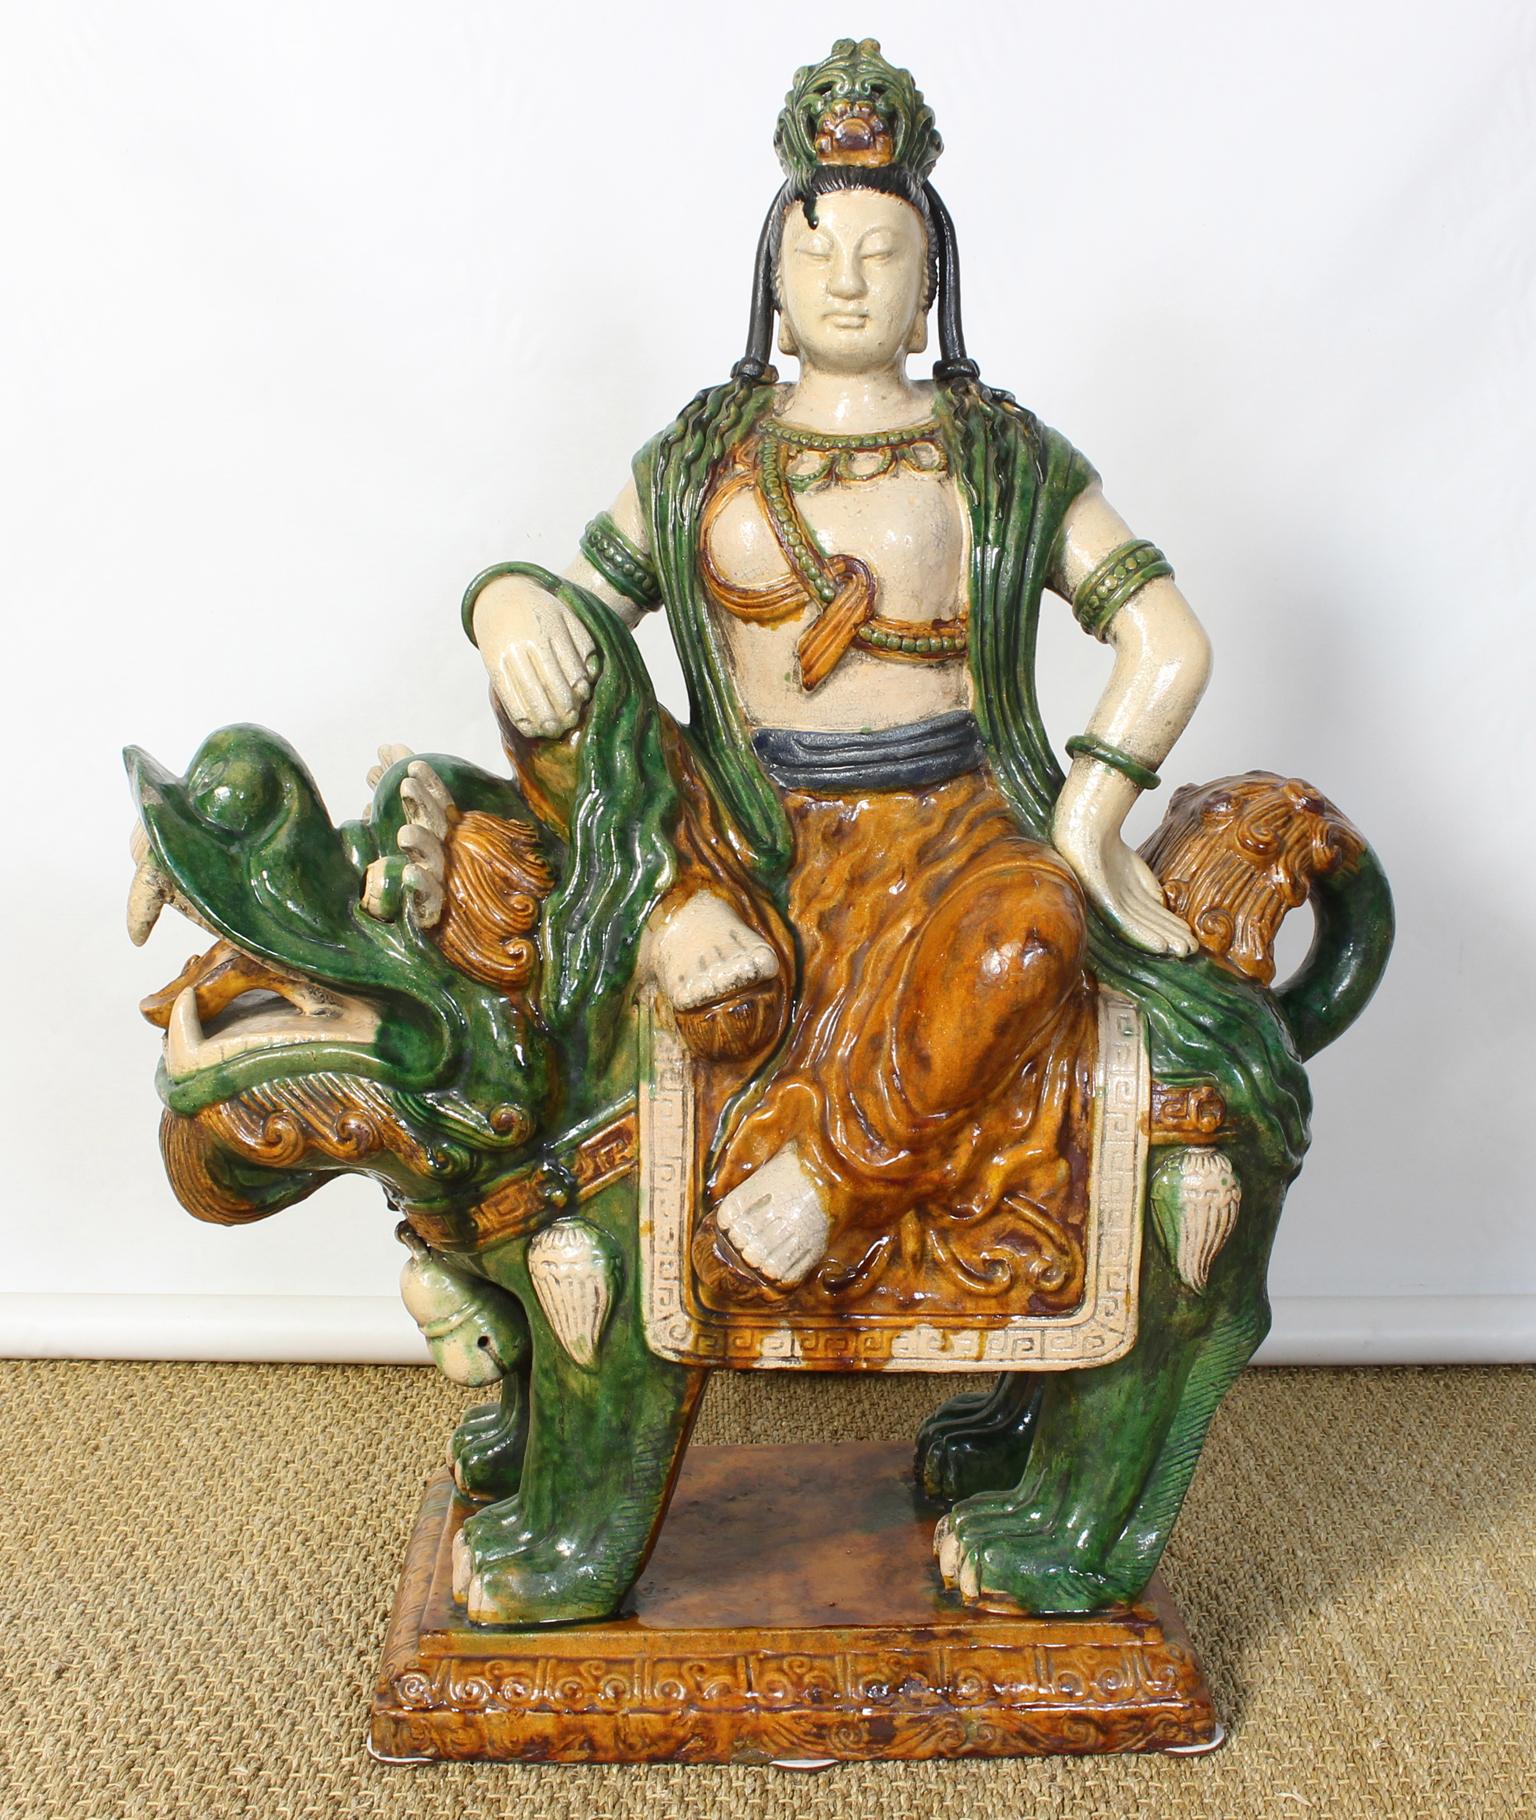 A large and impressive mid-20th century Chinese glazed ceramic polychrome decorated statue of Quan Yin perched upon a foo dog.